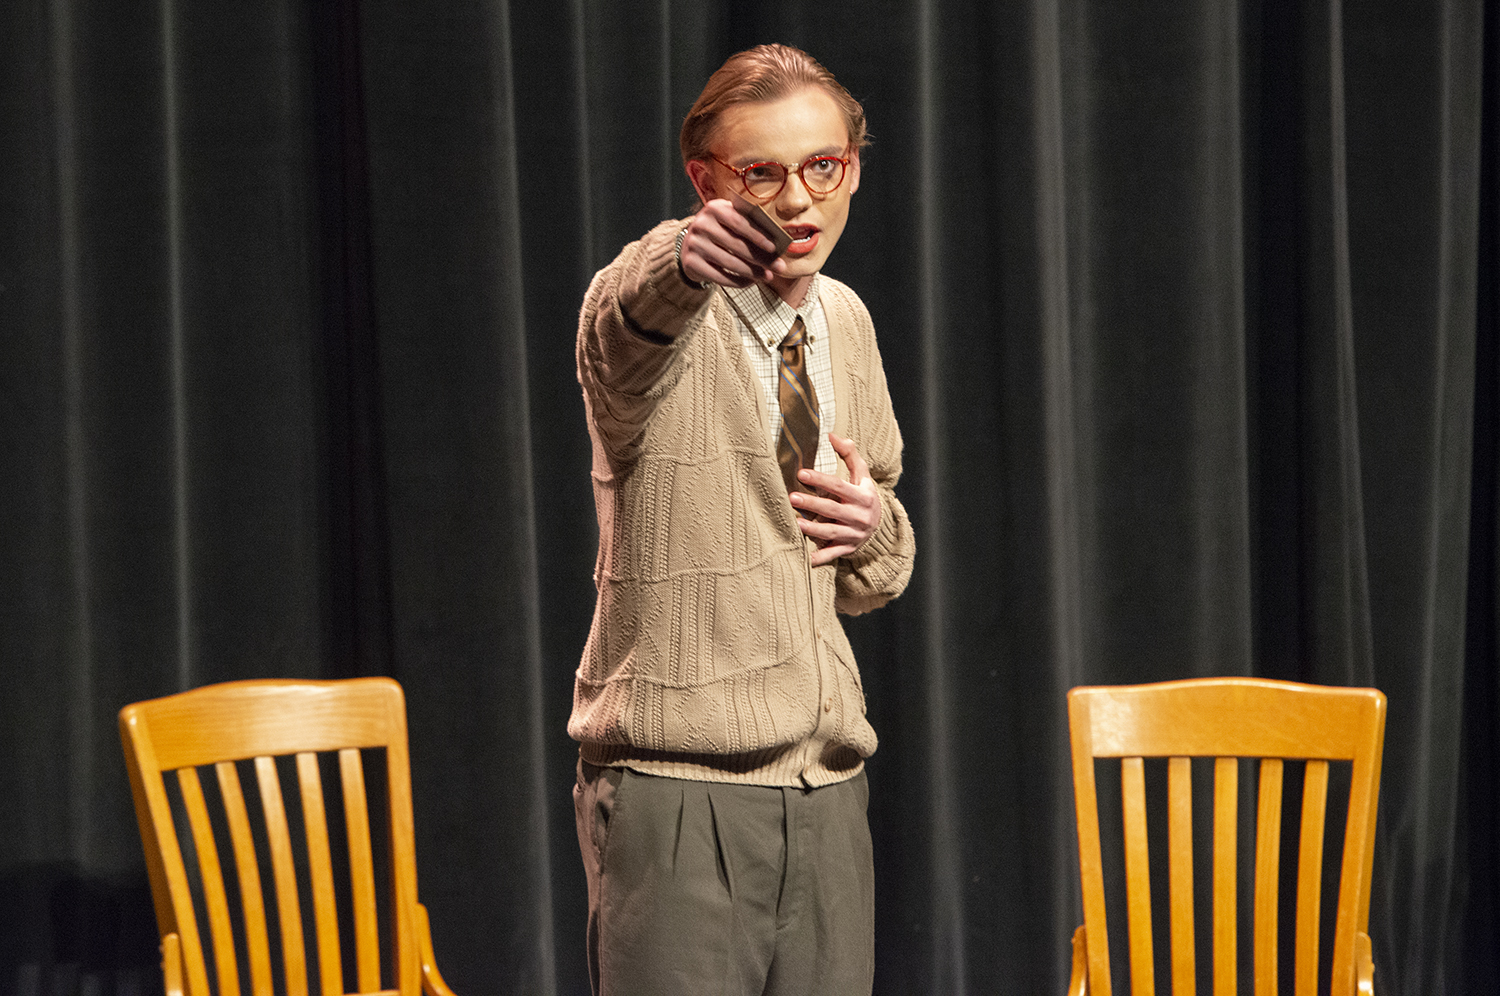 Performance of "A Hand of Bridge", a man holds cards in his hands and gestures to audience